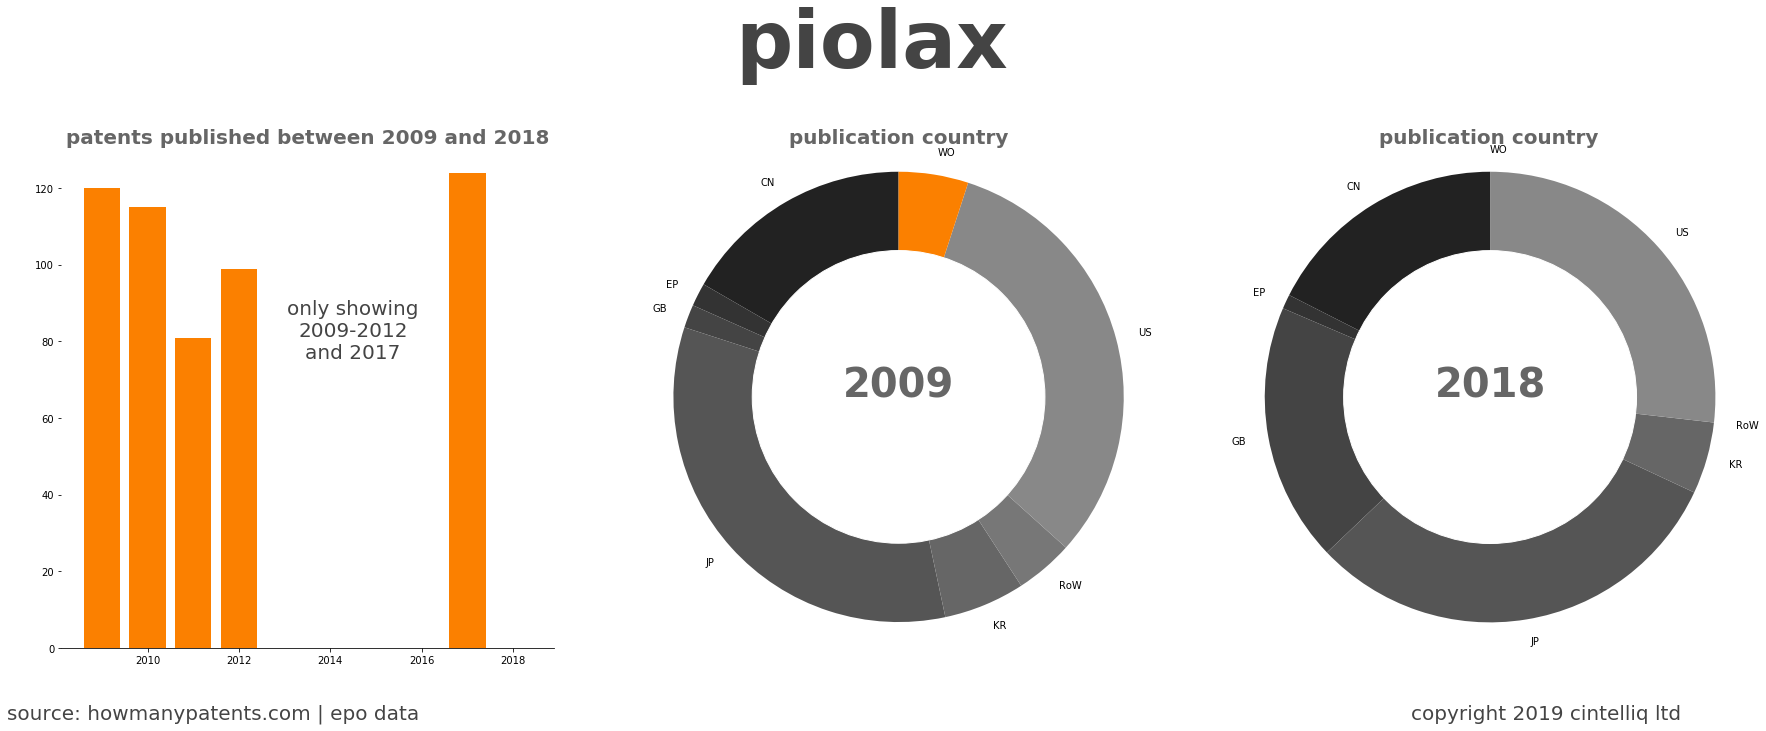 summary of patents for Piolax